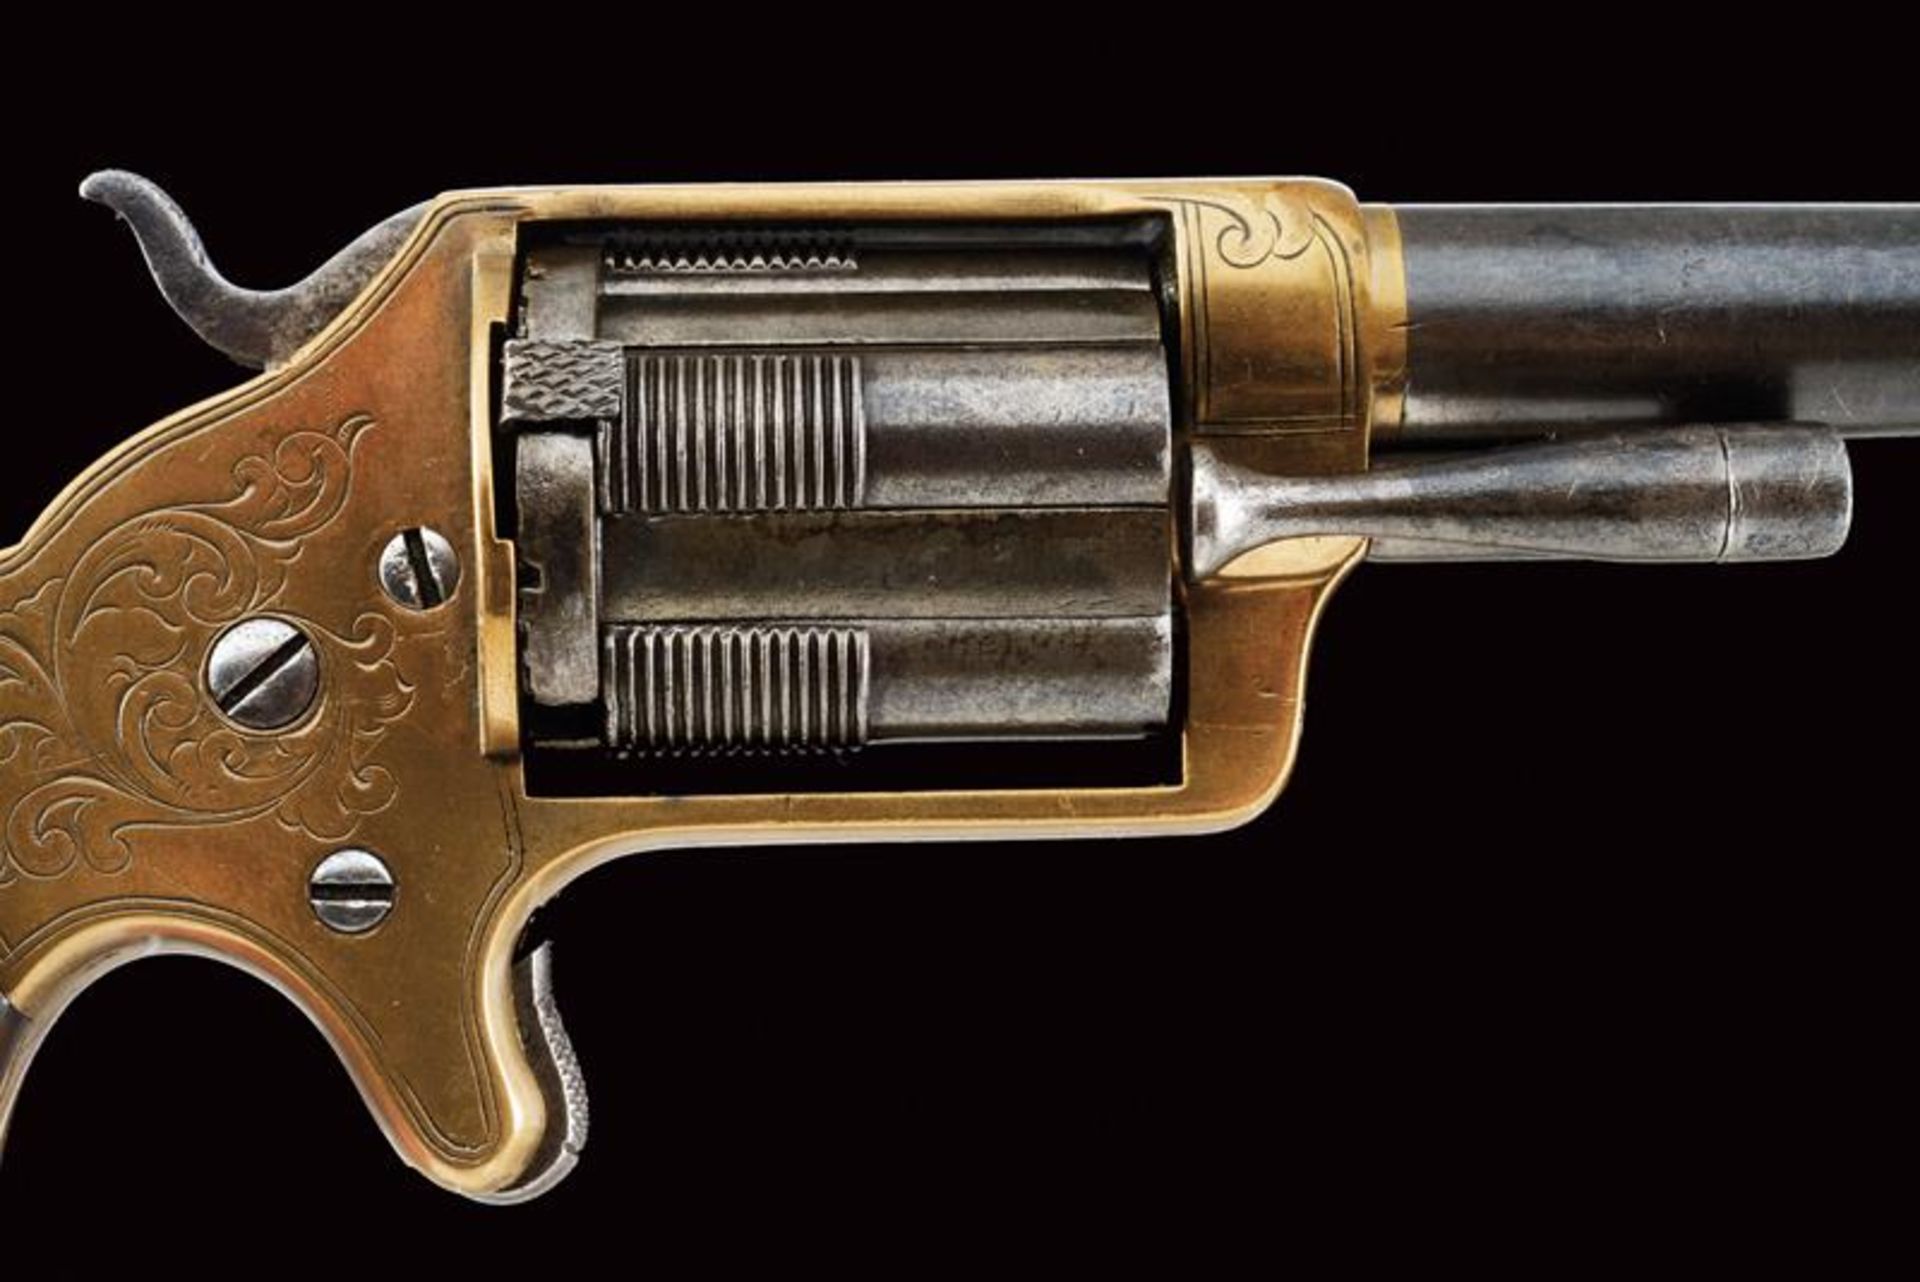 A Slocum Frontloading Pocket Revolver - Image 2 of 7